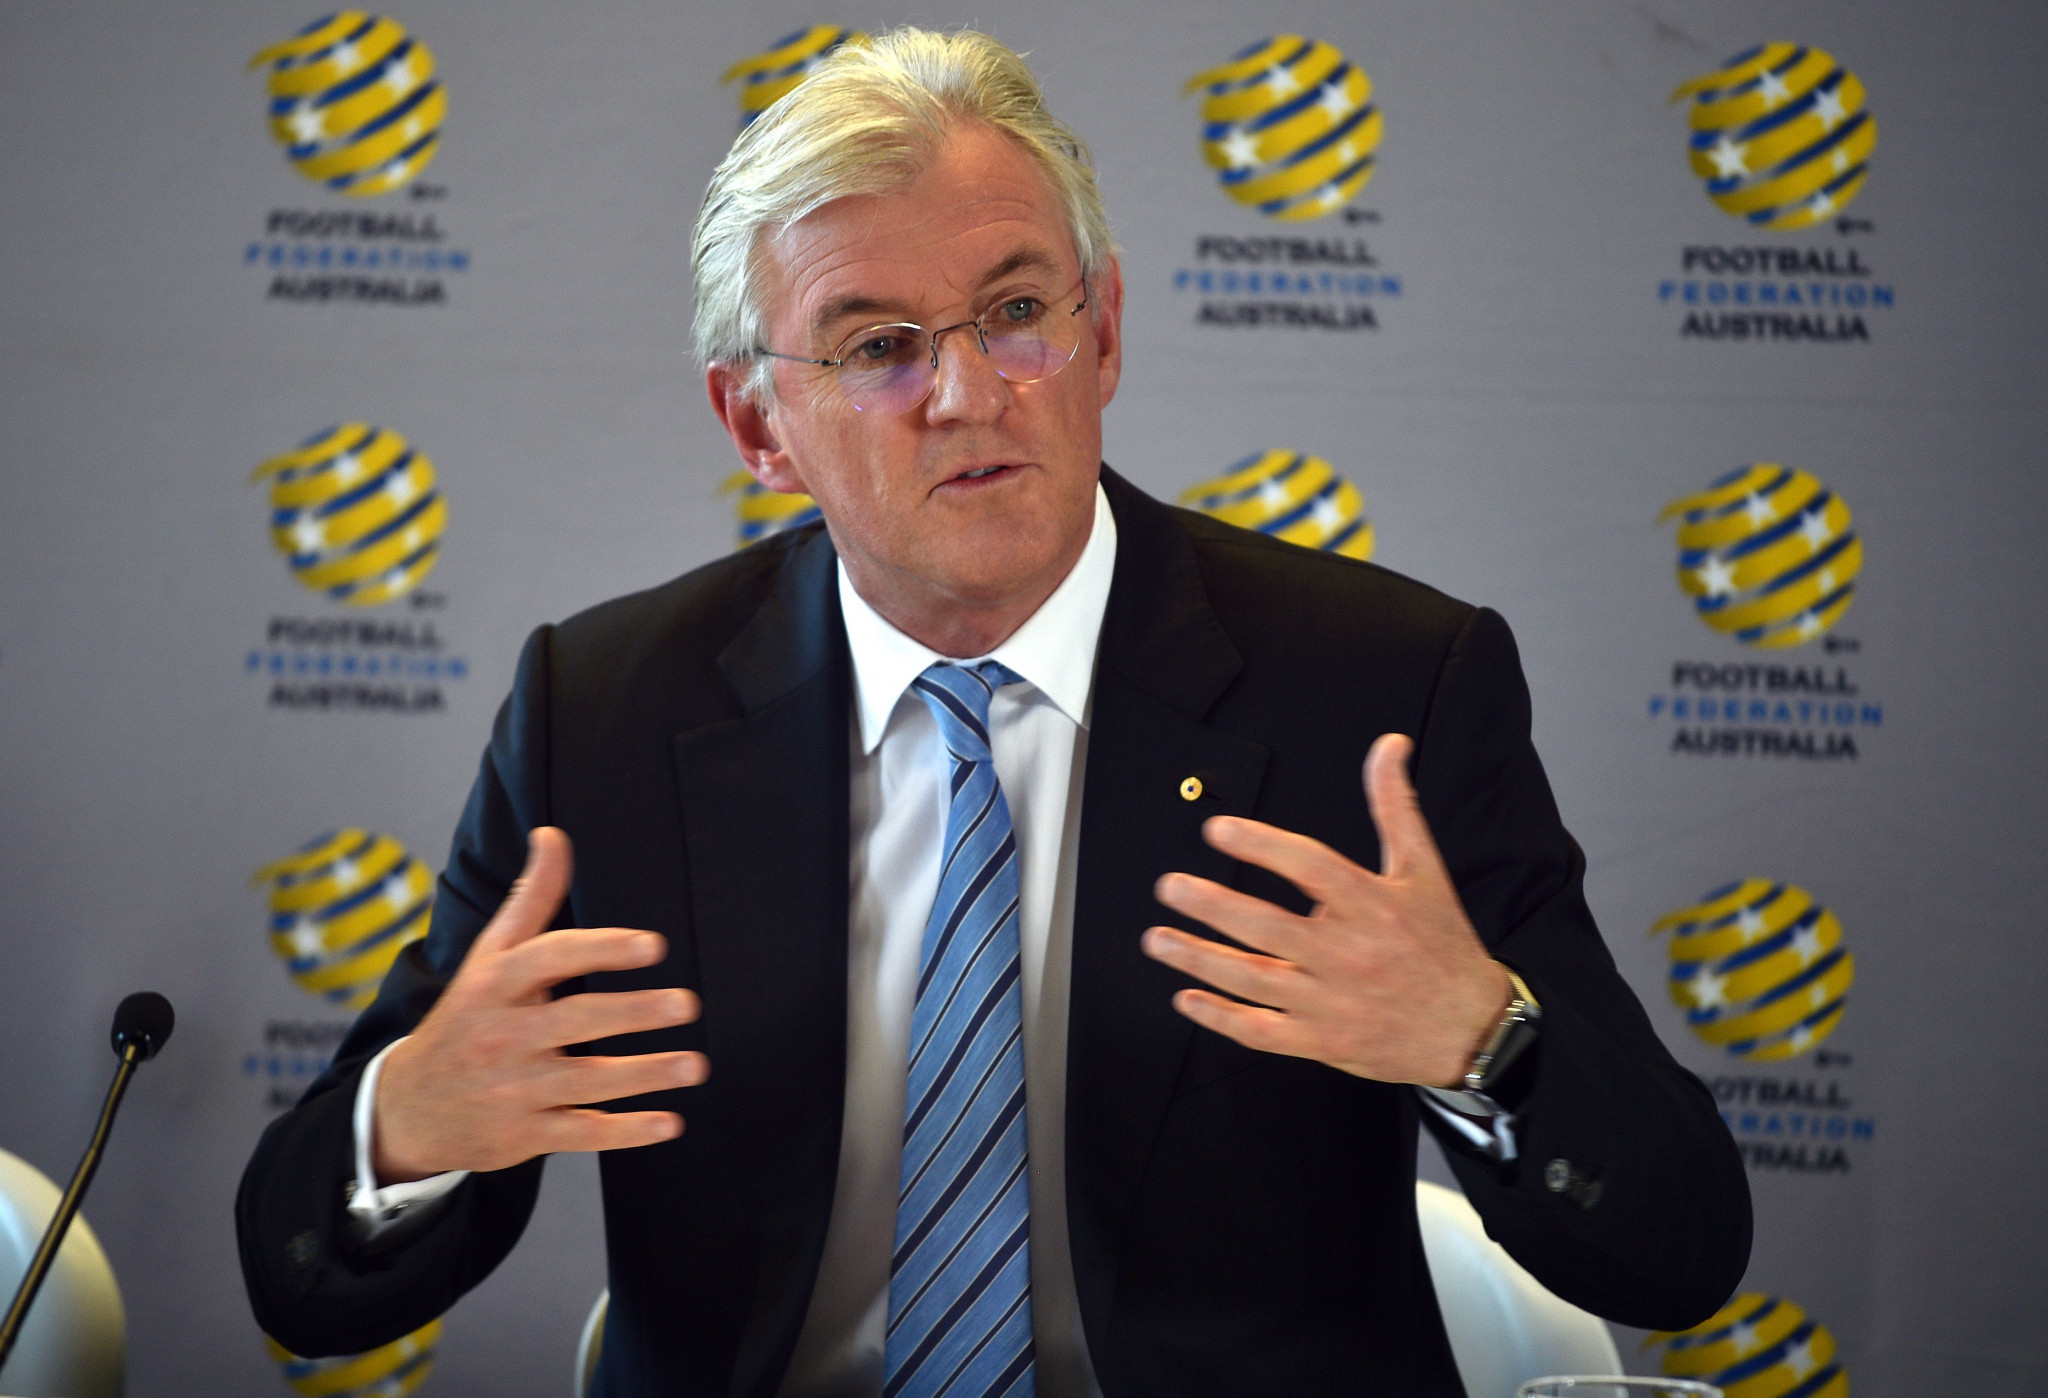 FIFA set to appoint Normalisation Committee to run FFA after motion to reform Congress fails